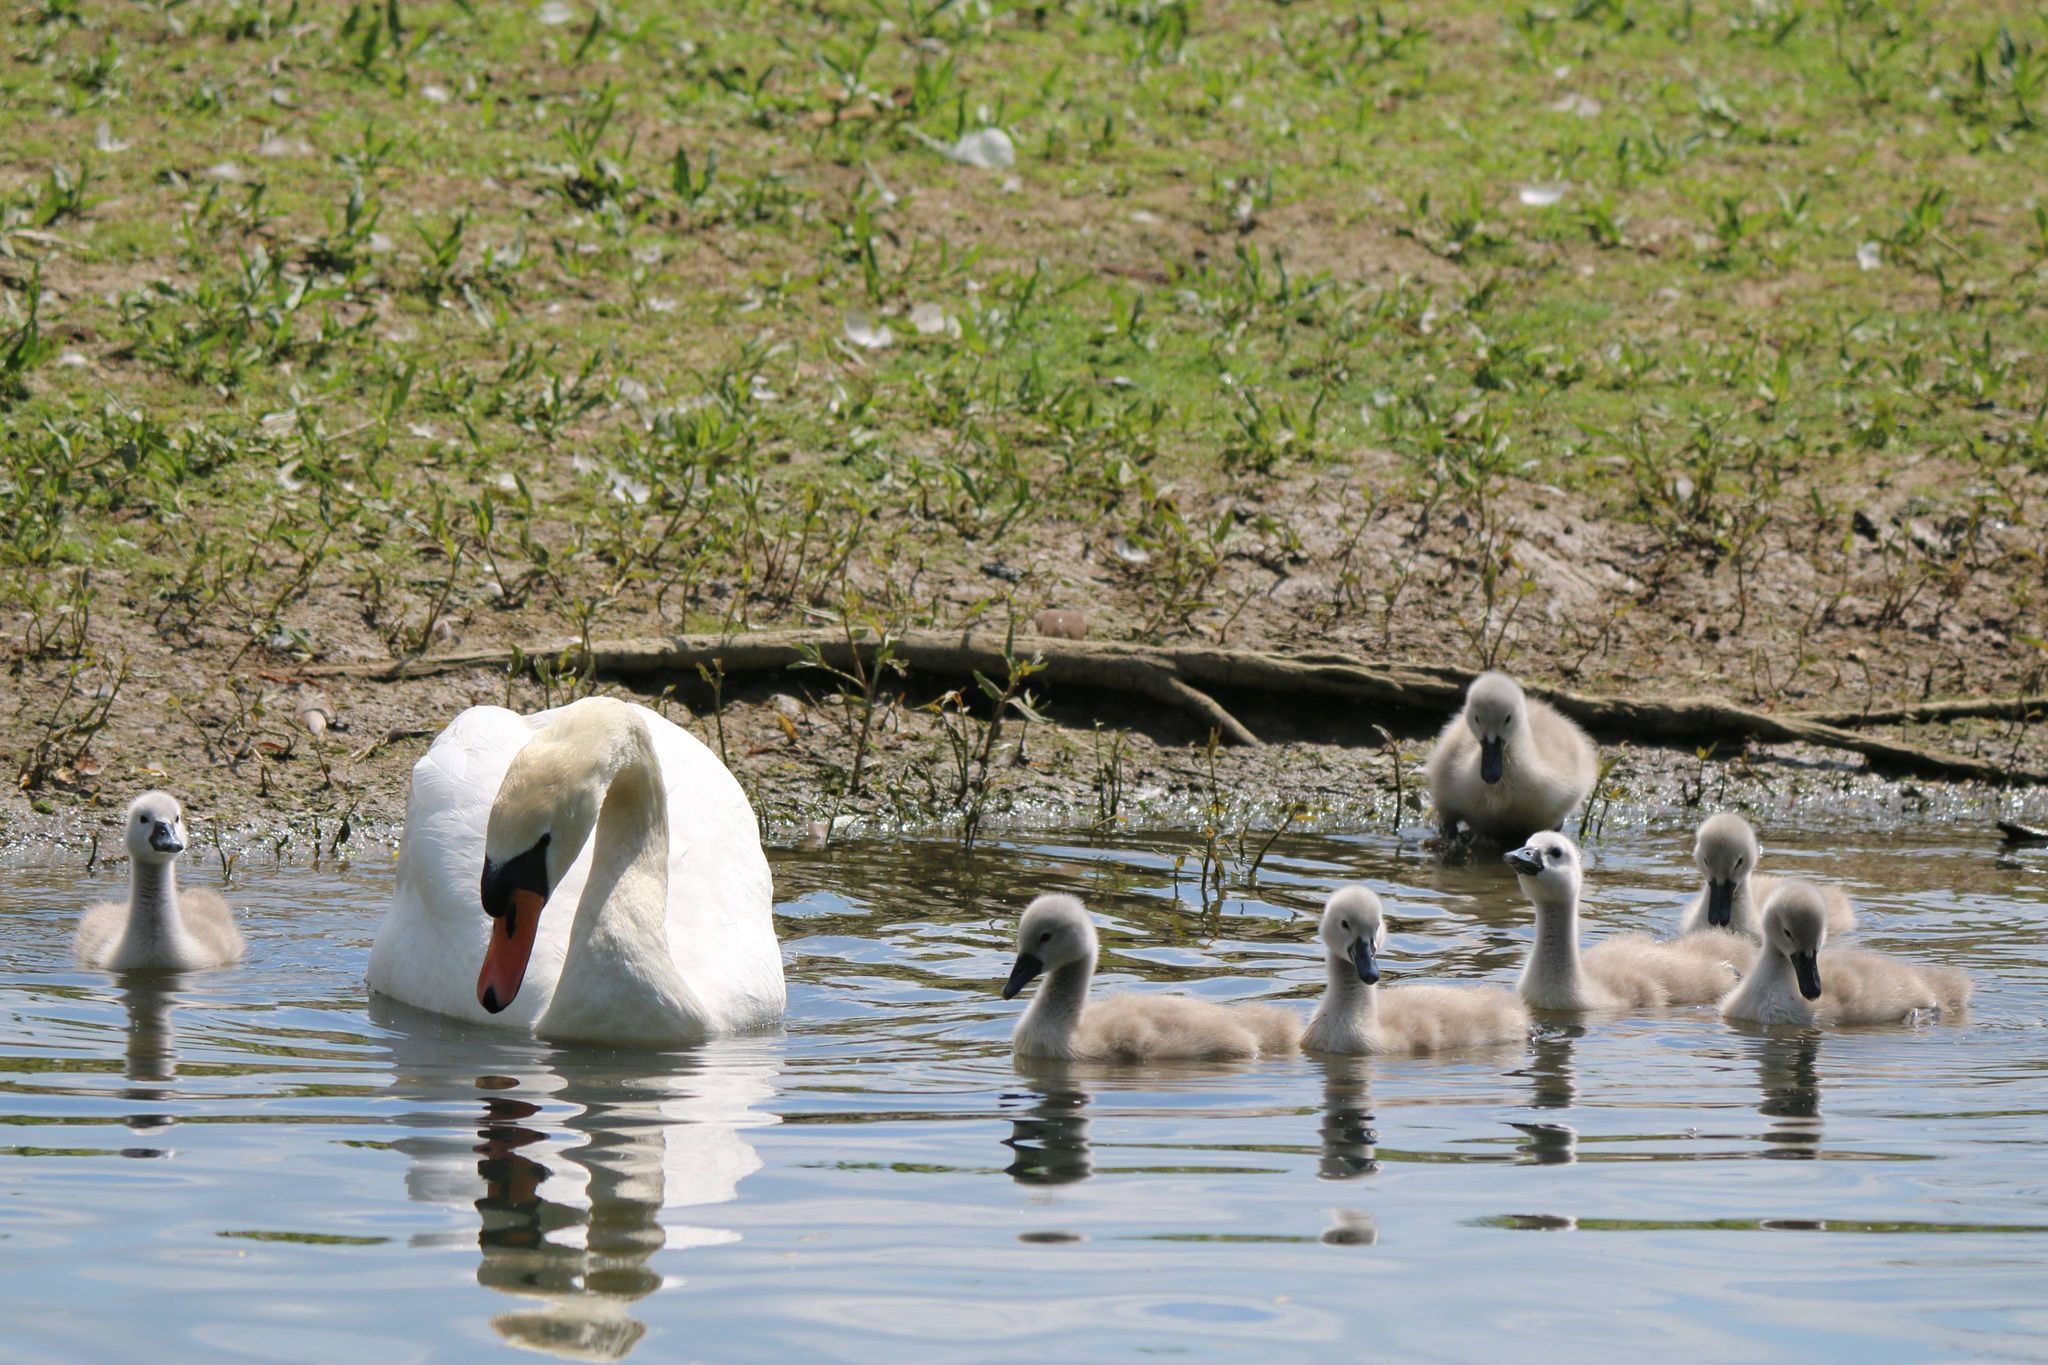 A family day out in Watermead (Sarah Hussain)